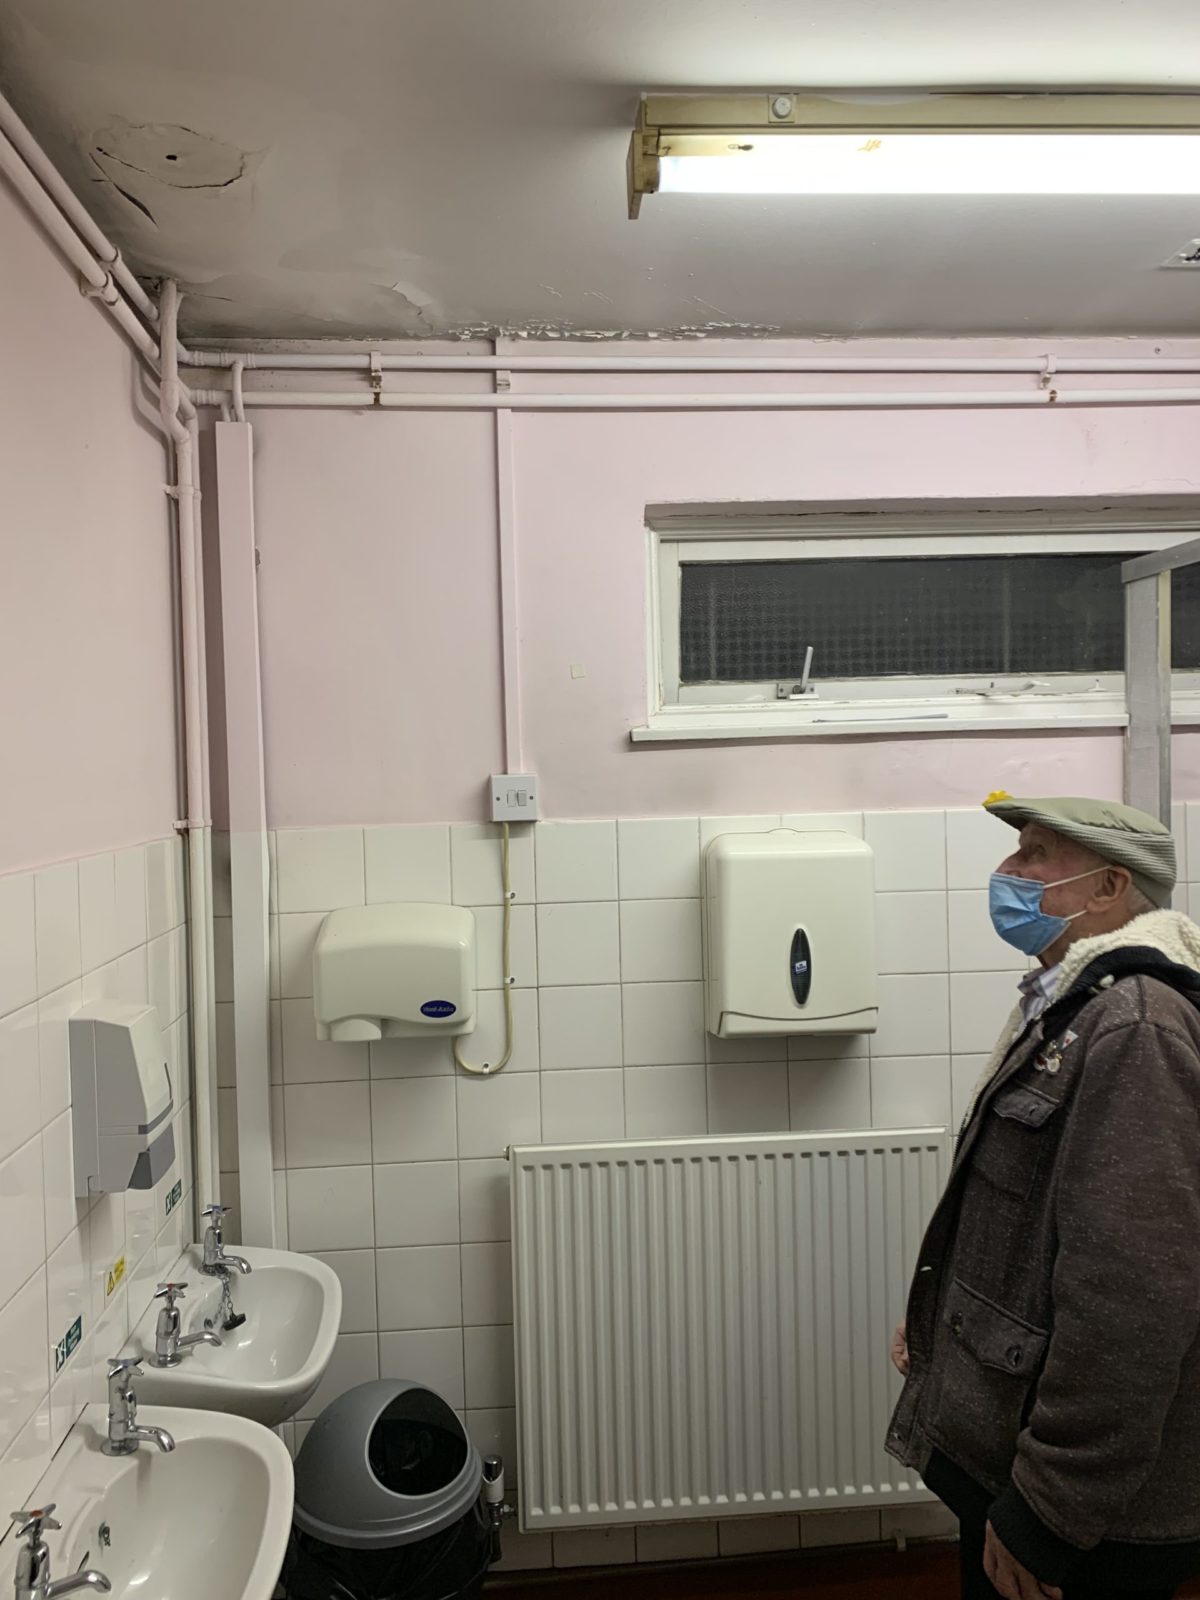 Local resident and Arbourthorne TARA member Derek Smith looking at water damage to the inside of the Community cENTRE